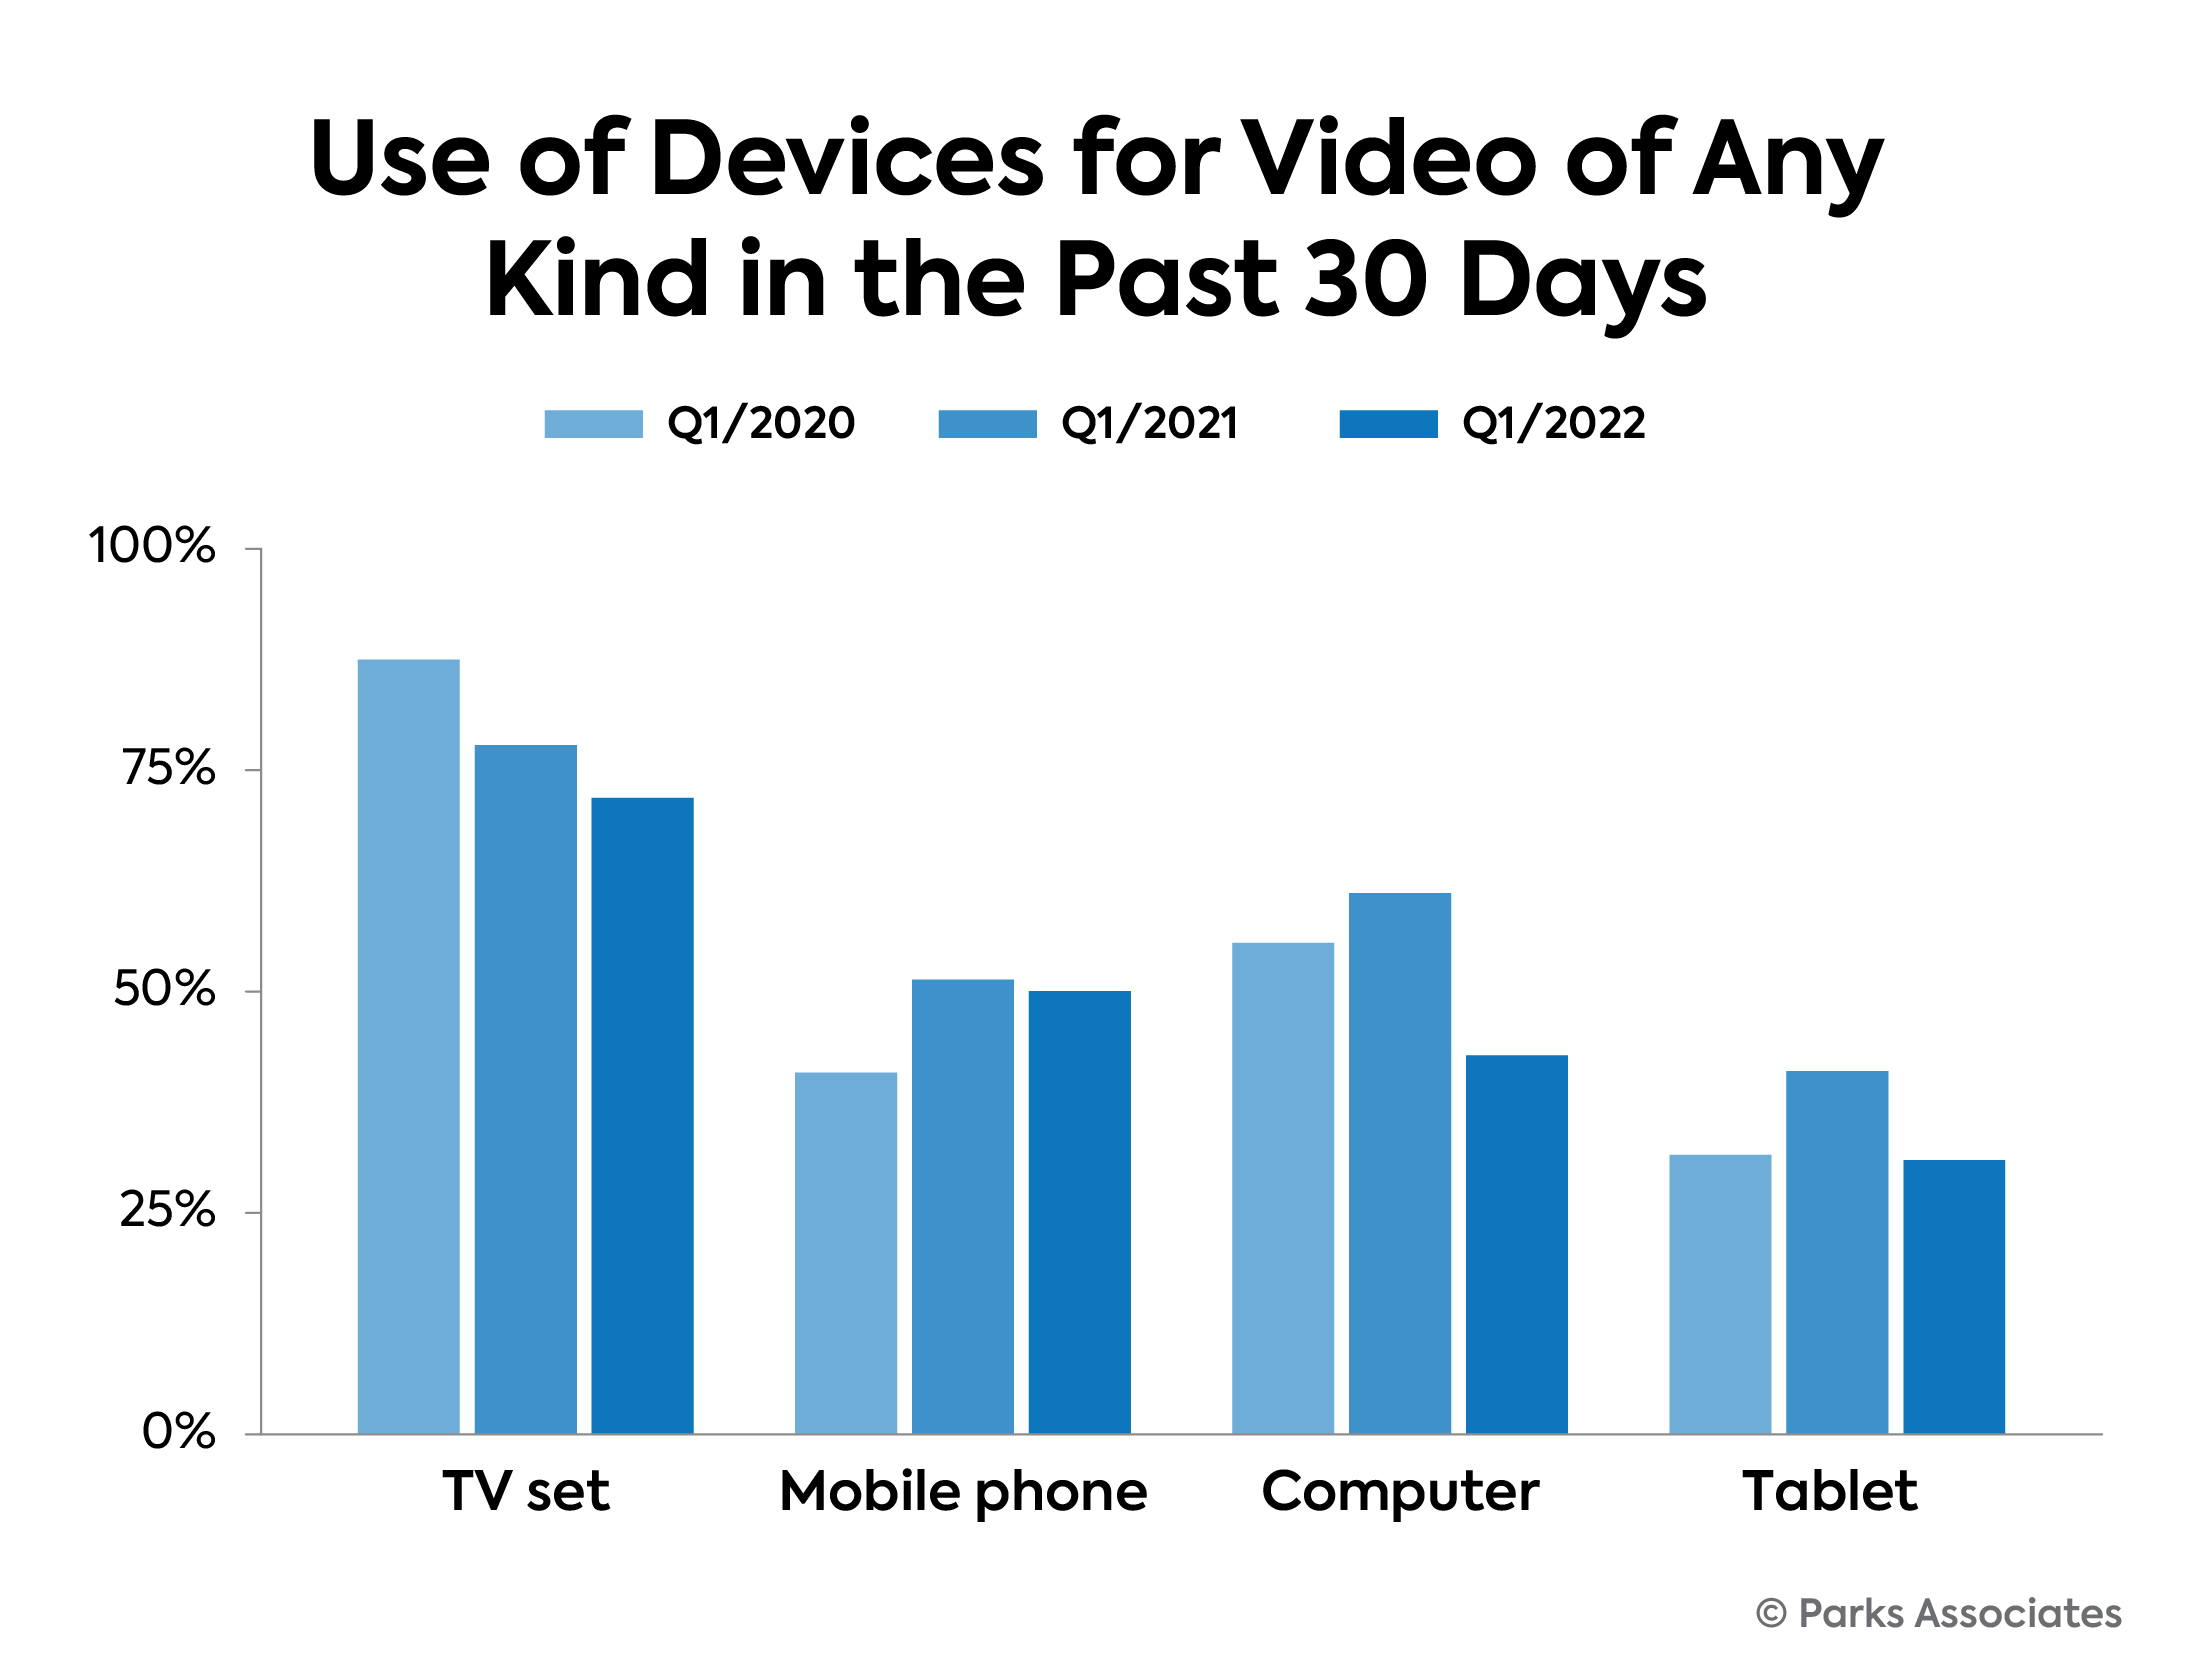 Use of devices for video of any kind in the past 30 days - TV Set, Mobile phone, Computer, Tablet - Q1 2020, Q1 2021, Q1 2022